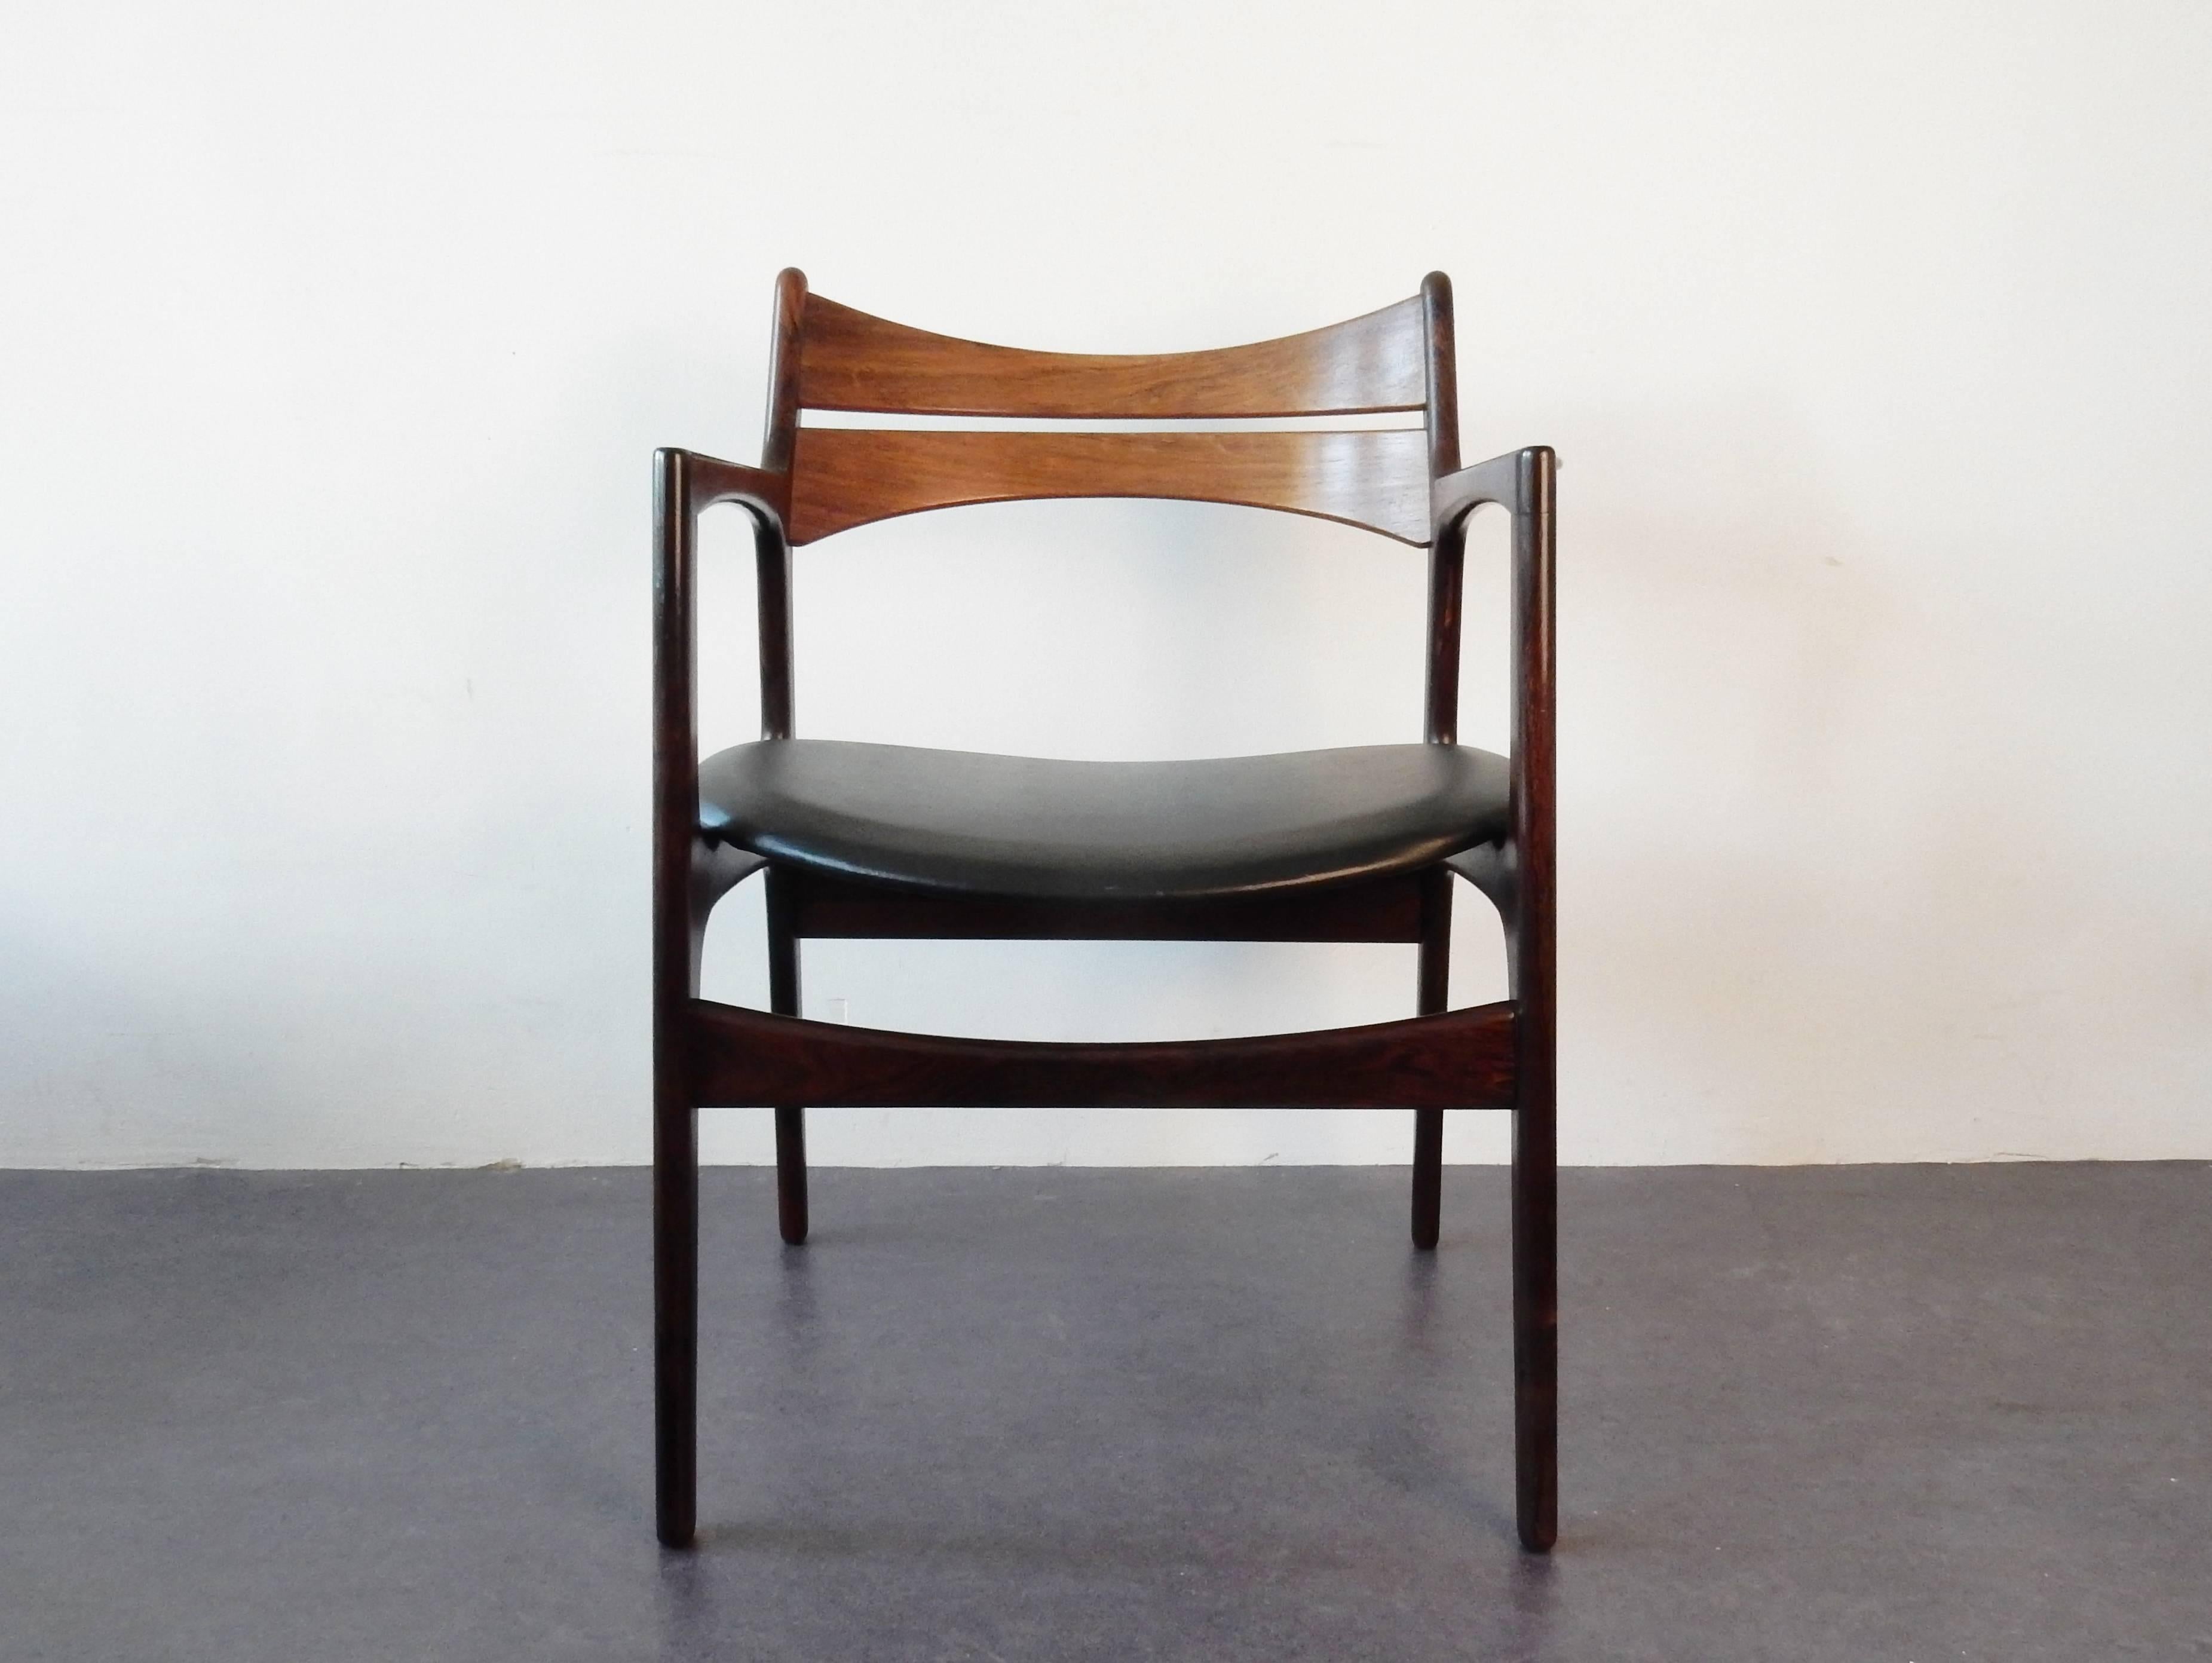 This armchair is a design by Erik Buck for Chr. Christensen Møbelfabrik i/s in Vamdrup, Denmark. A beautiful design, executed in rosewood with leatherette seat. The design has the signature of Erik Buck all over as it is very recognizable. The chair